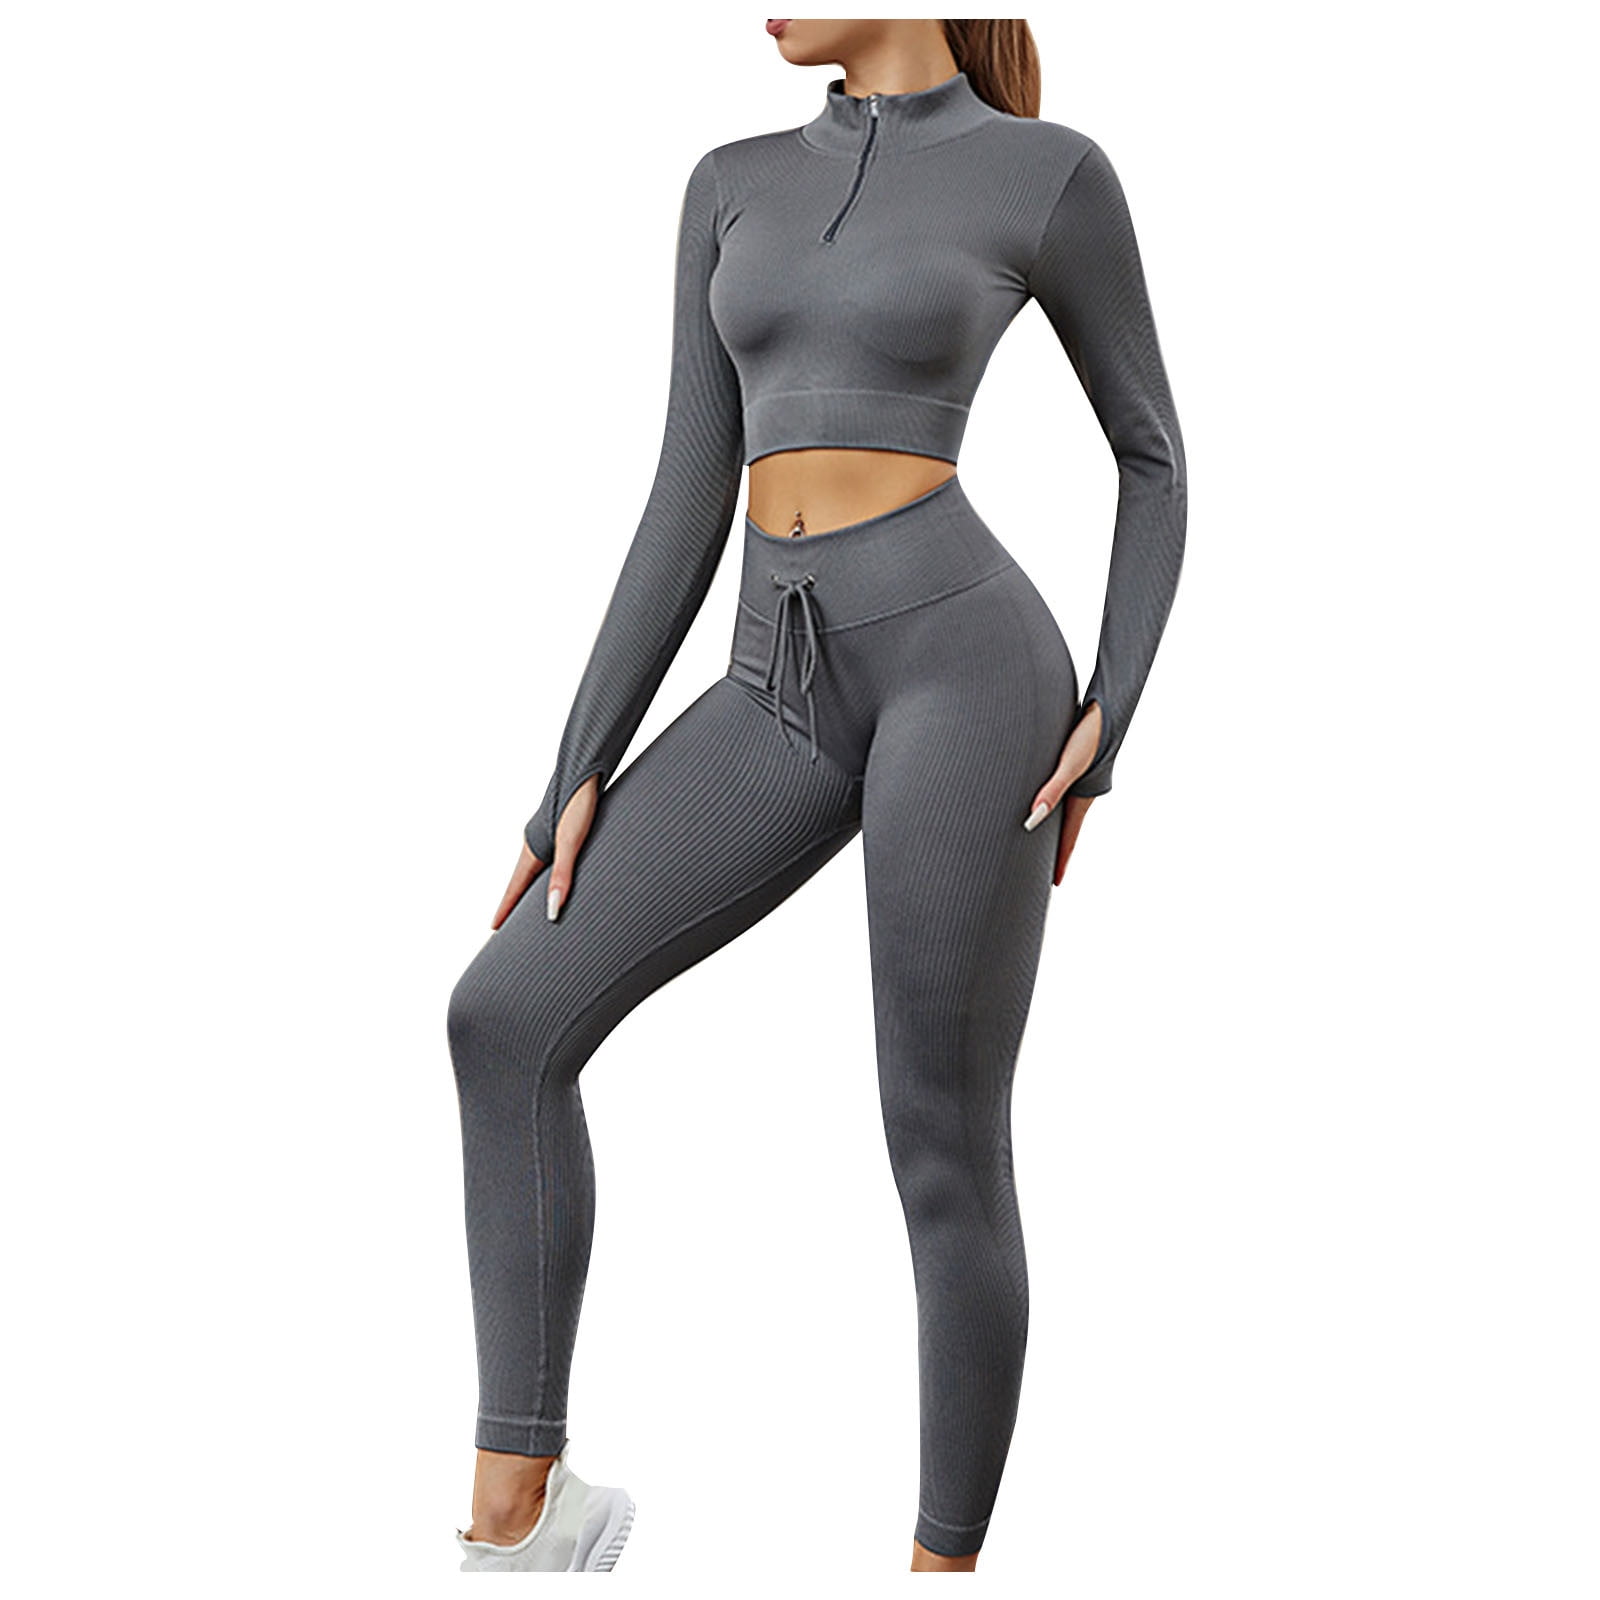 Jalioing Yoga Outwork Suits for Women Stand Collar Half Zip Top